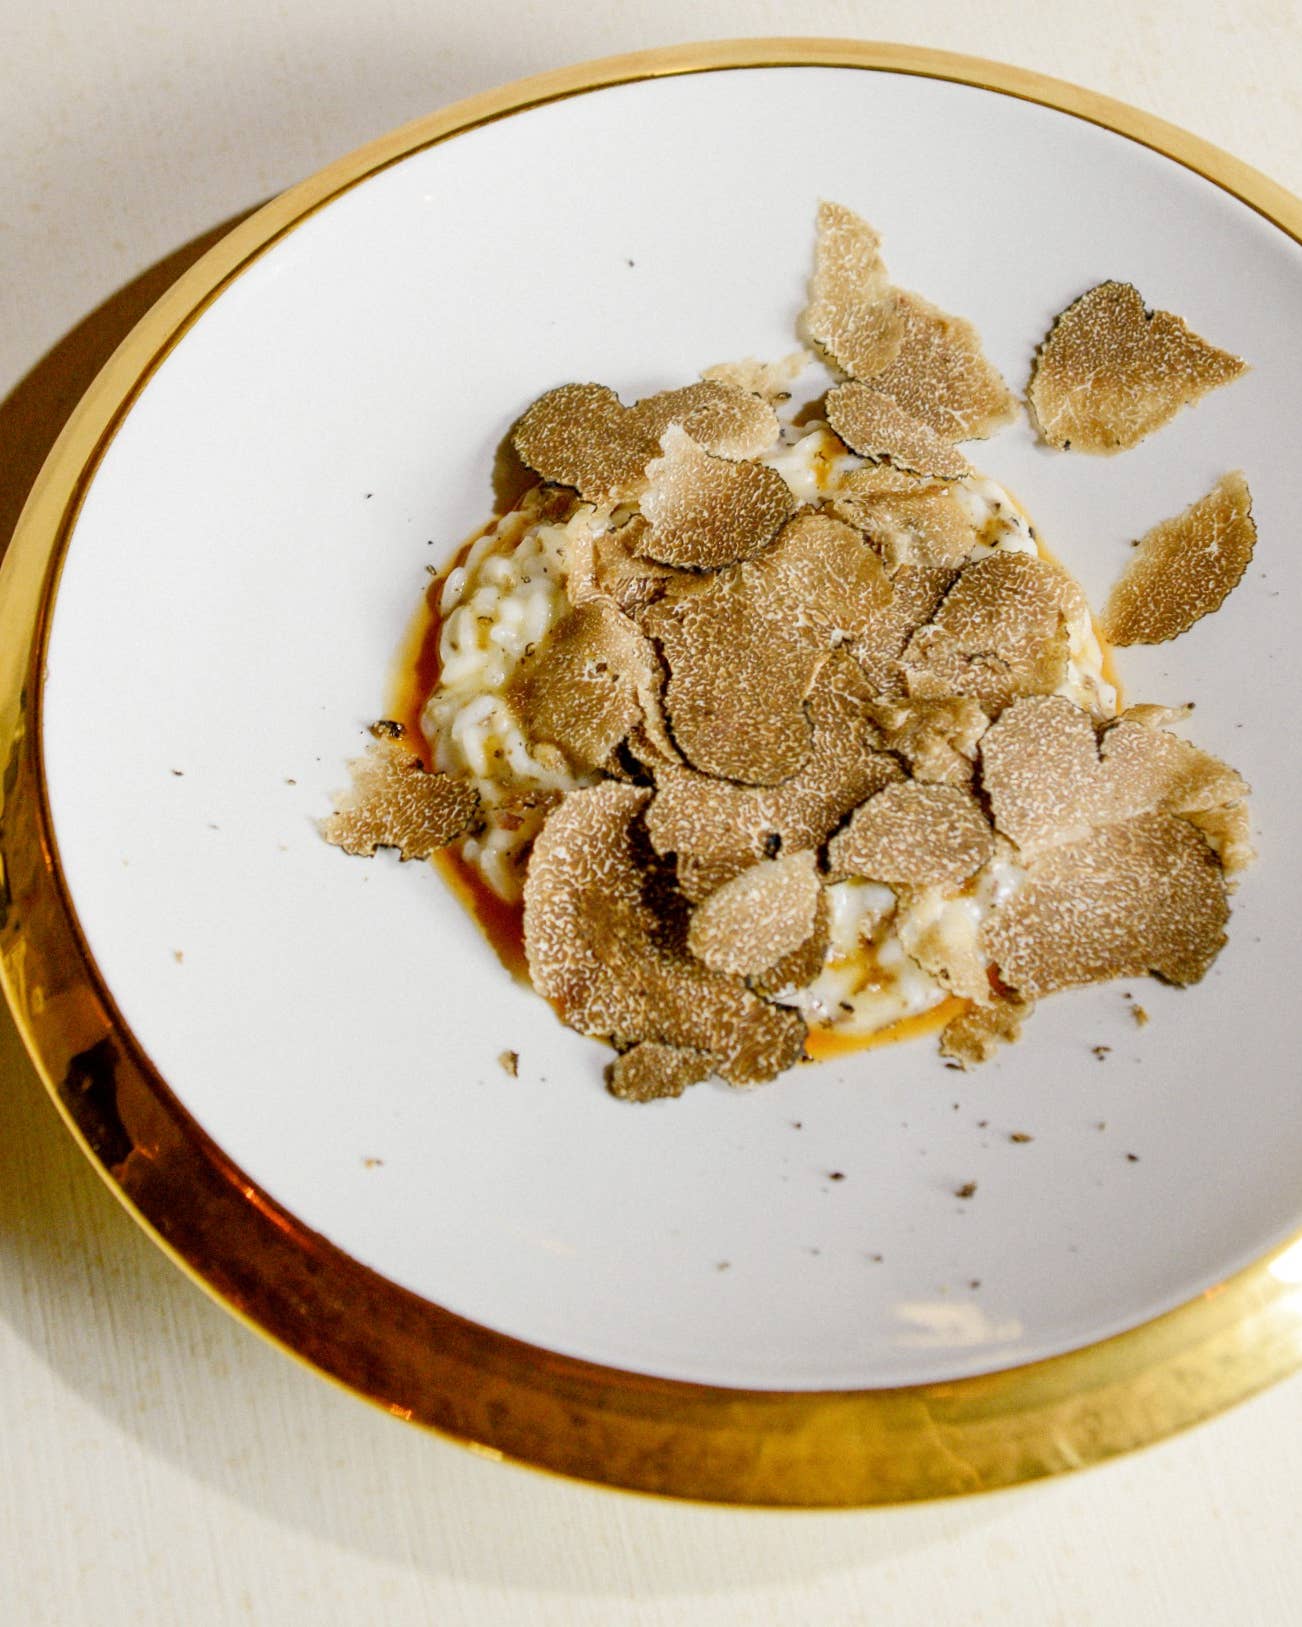 Truffle Risotto with Shaved Truffles